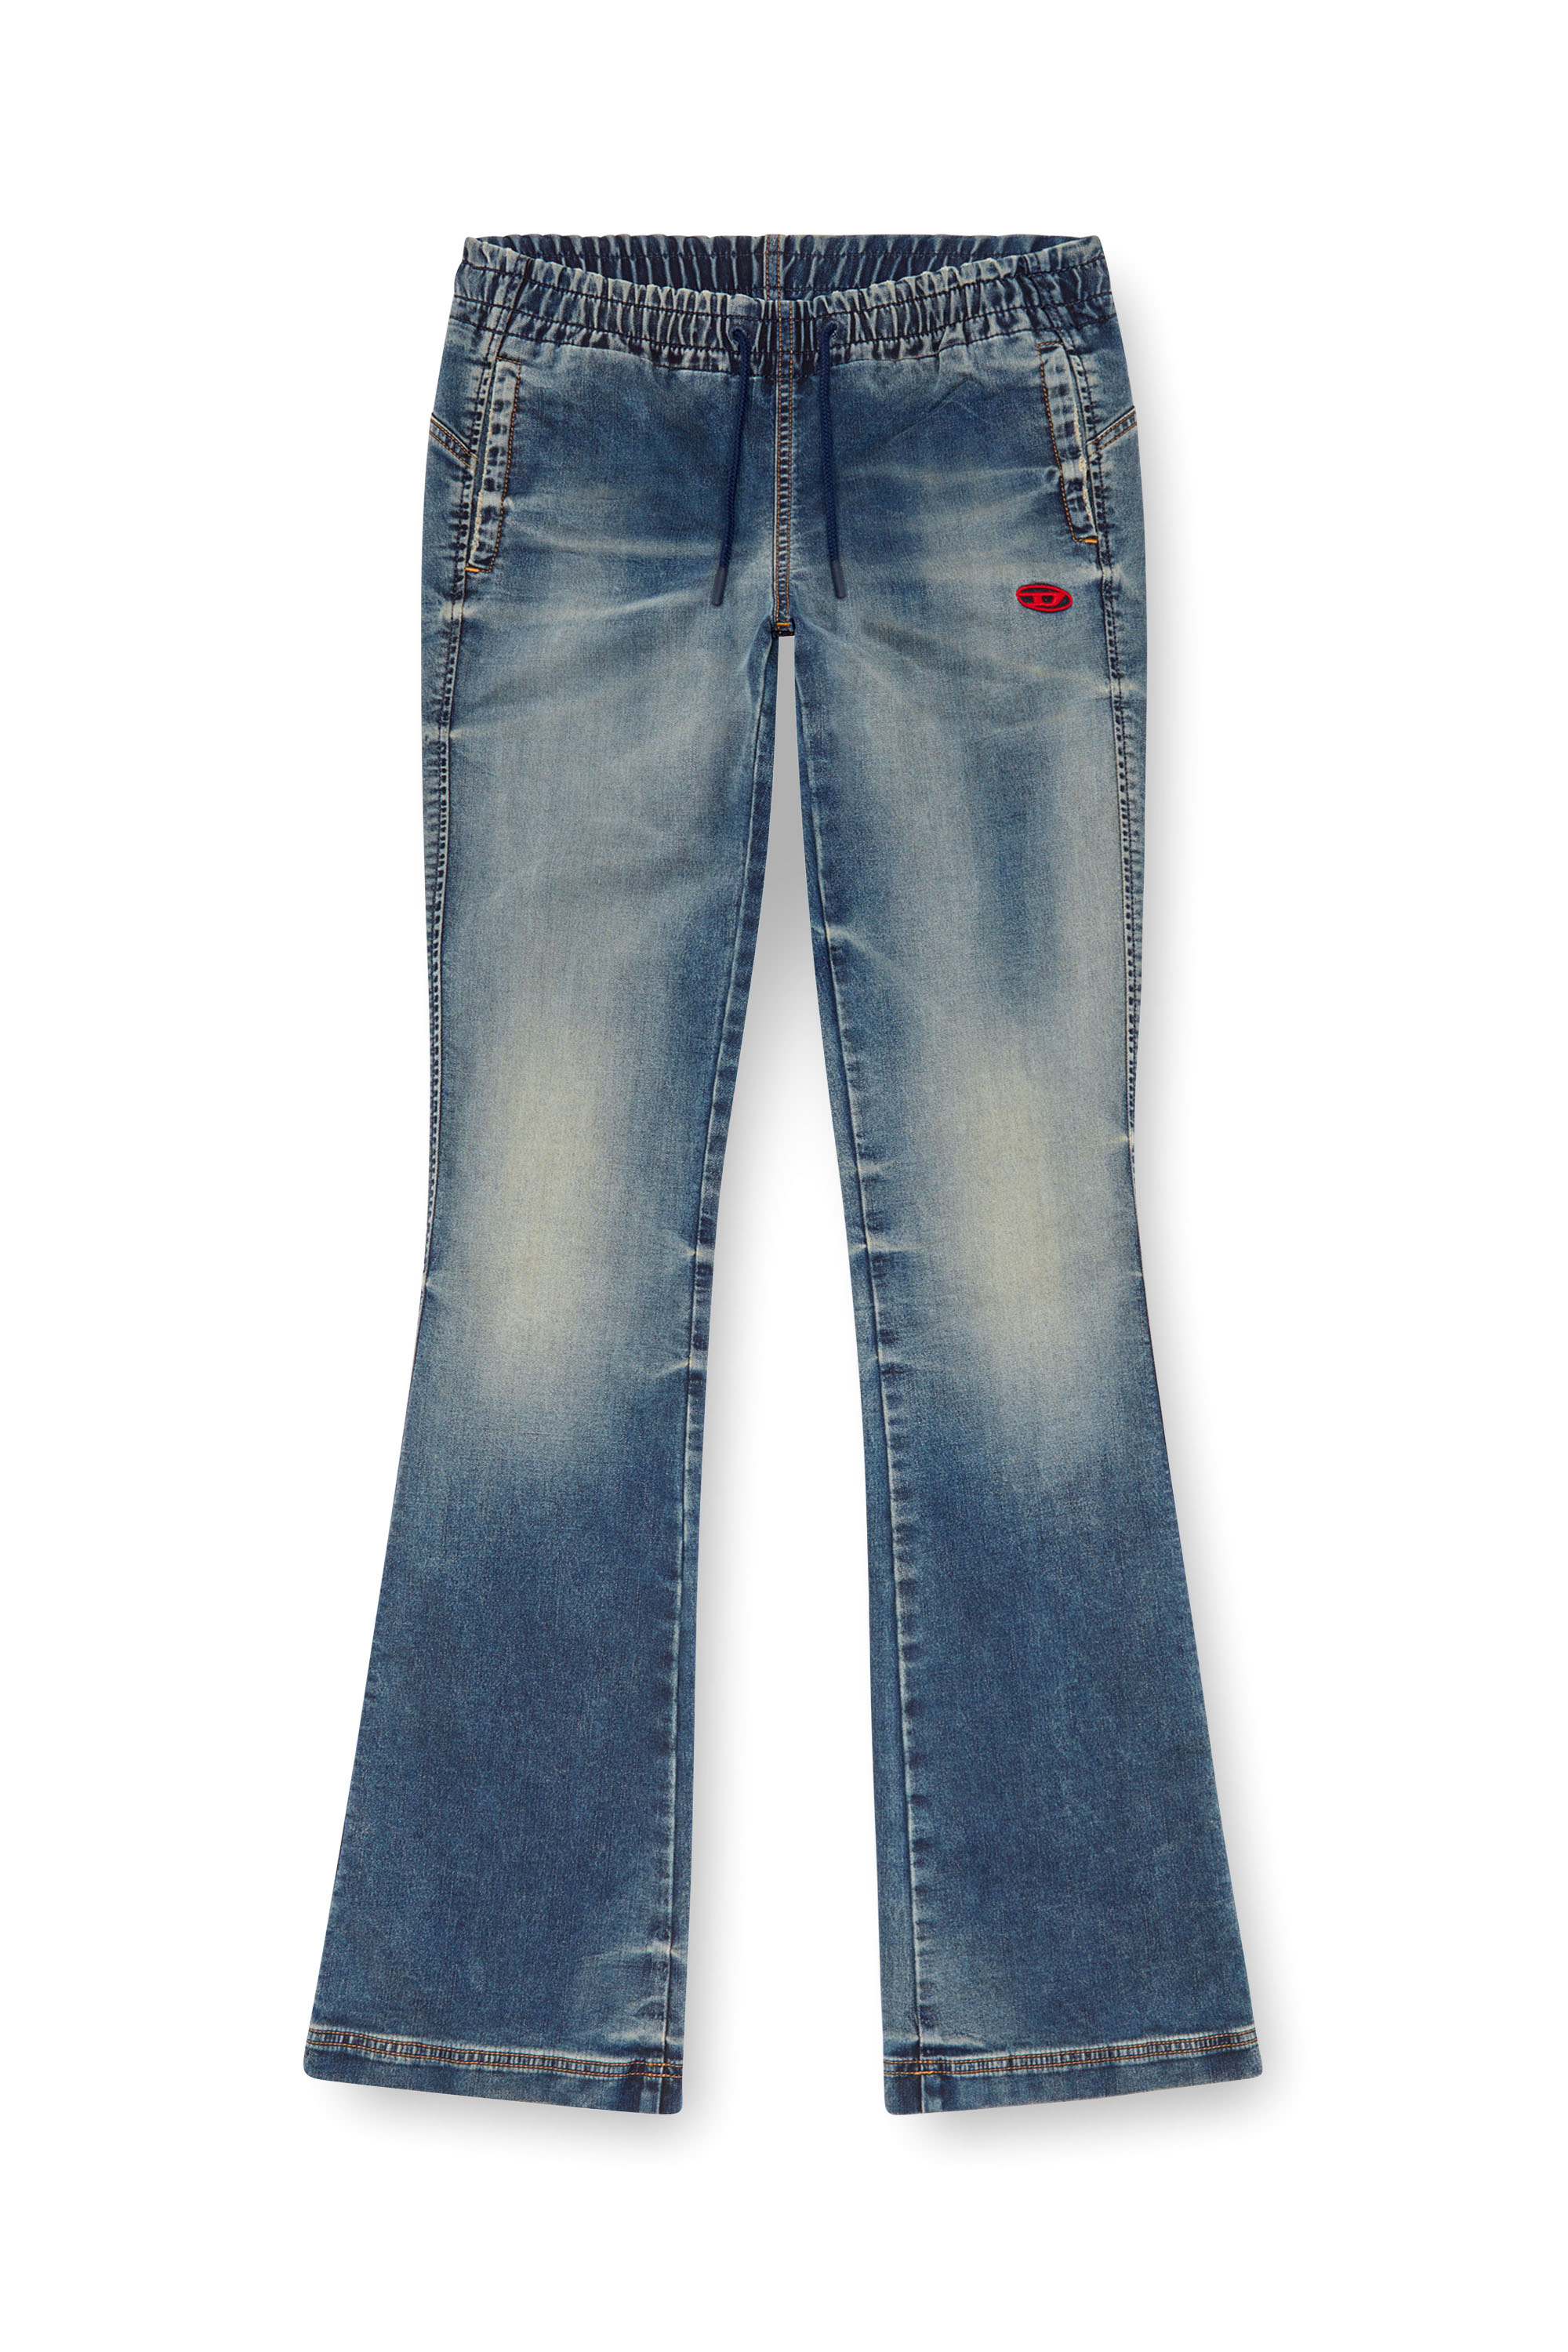 Diesel - Bootcut and Flare 2069 D-Ebbey Joggjeans® 068LZ, Mujer Bootcut y Flare 2069 D-Ebbey Joggjeans® in Azul marino - Image 3